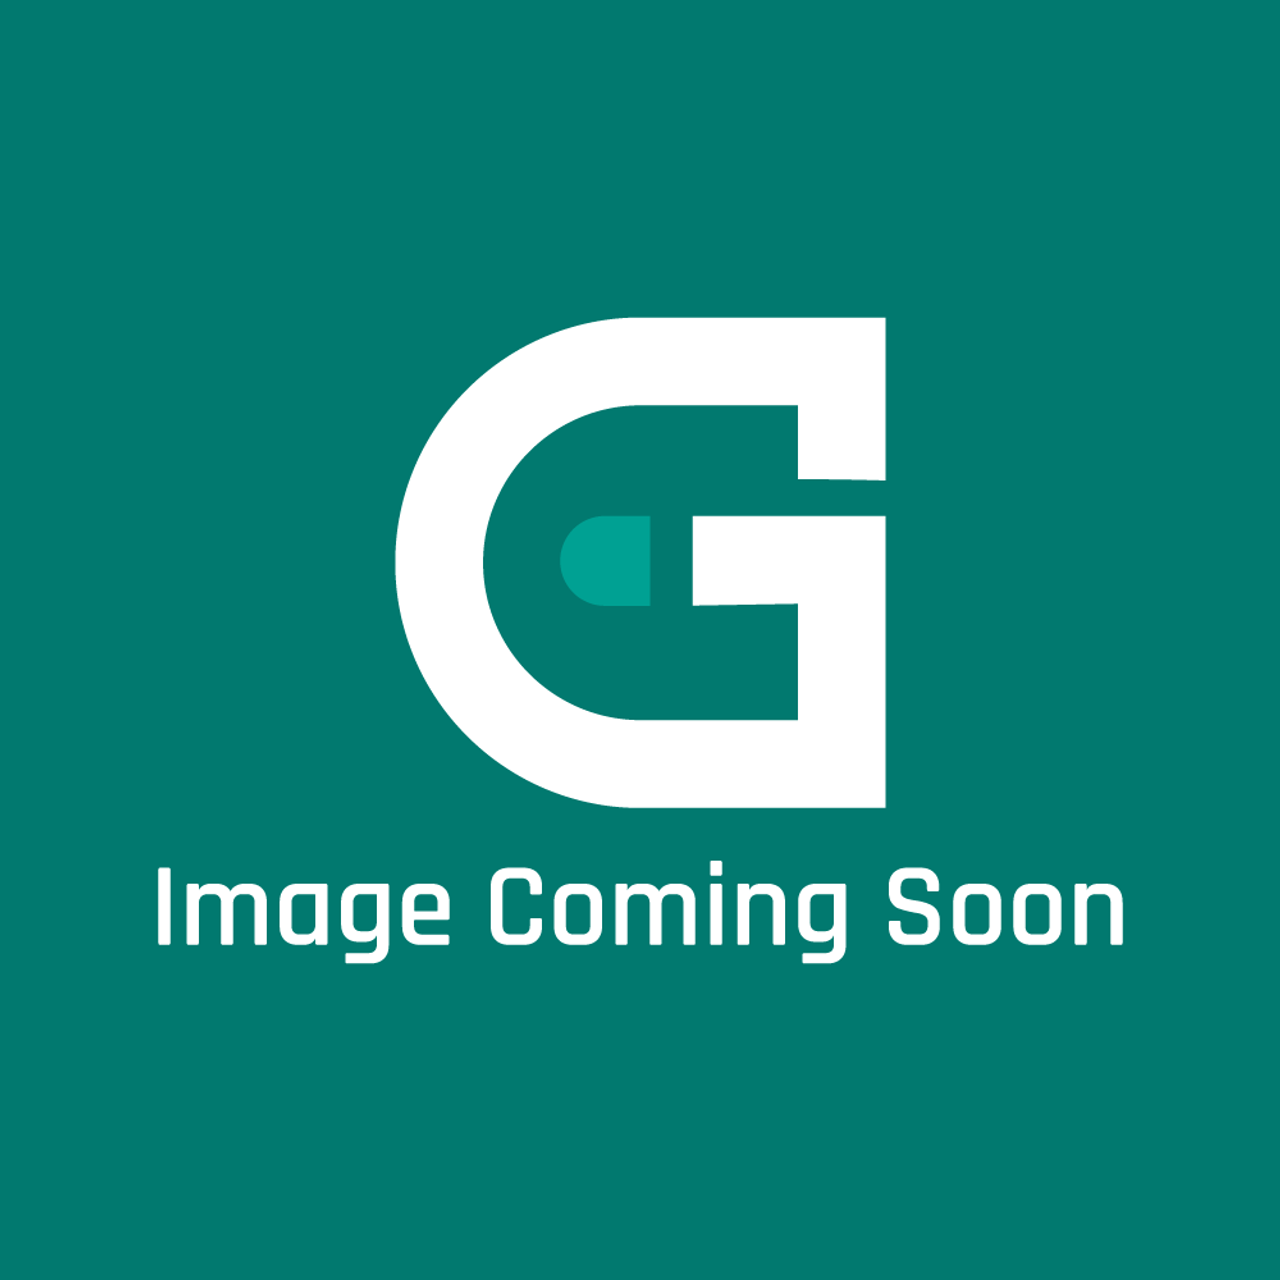 Garland 2222903 - Grease Tray 36In. Gd-36R B - Image Coming Soon!